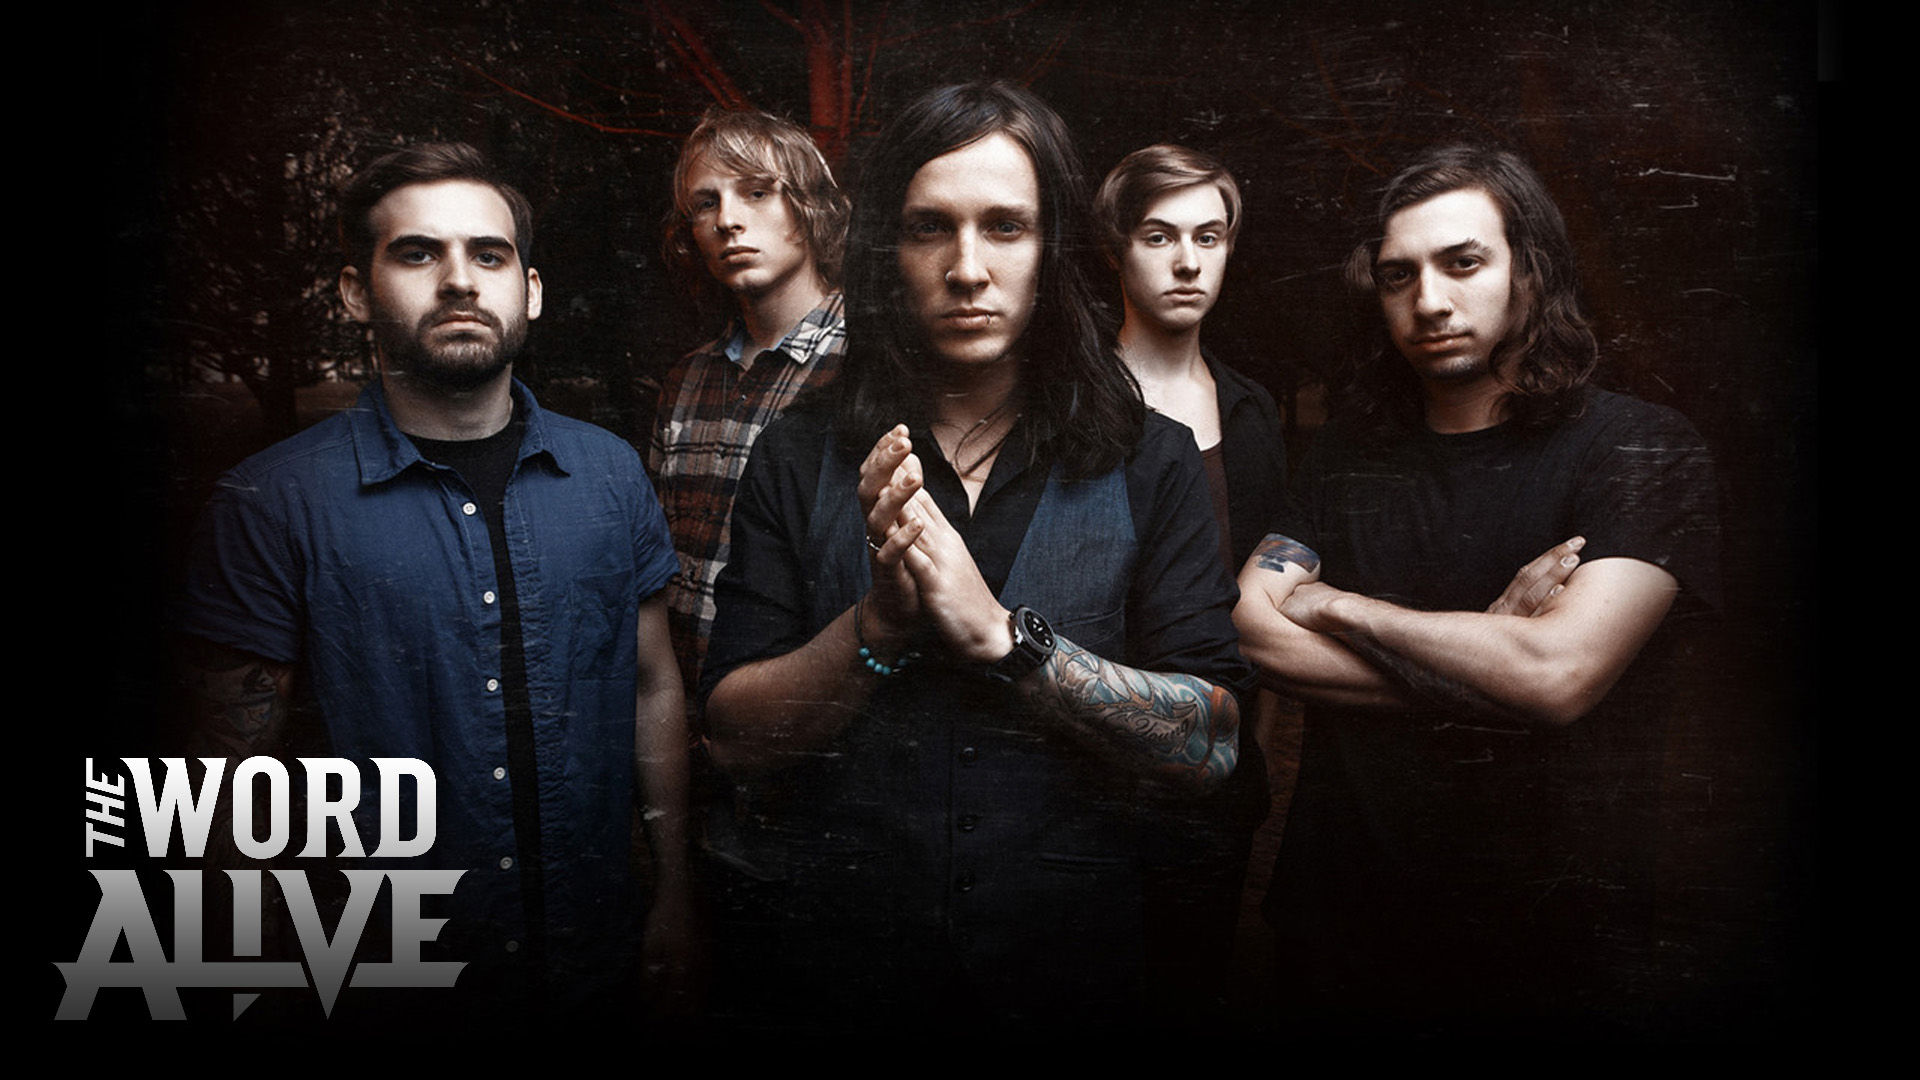 Altwall The Word Alive Wallpaper